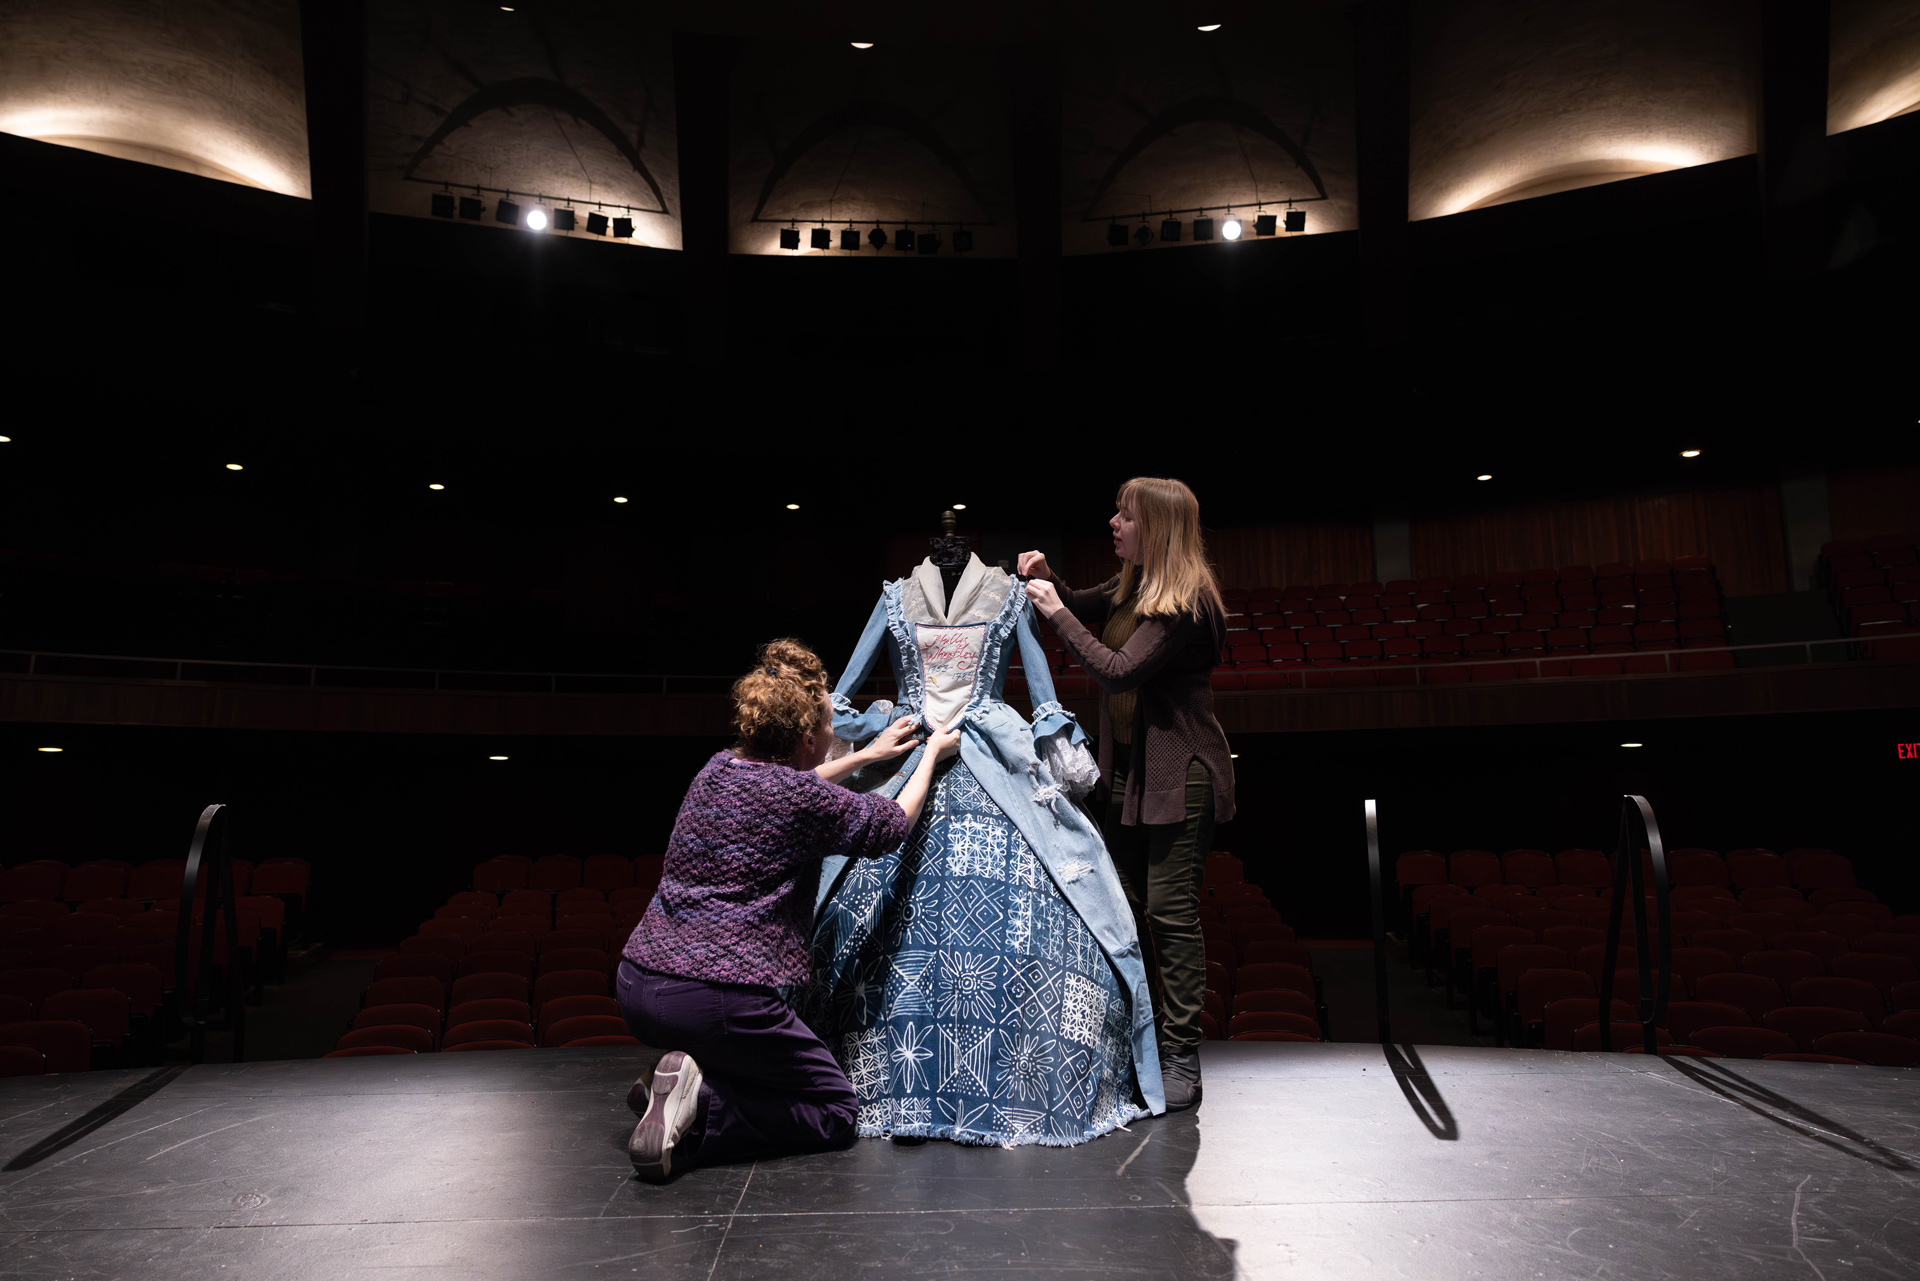 two people make adjustments to a denim dress.